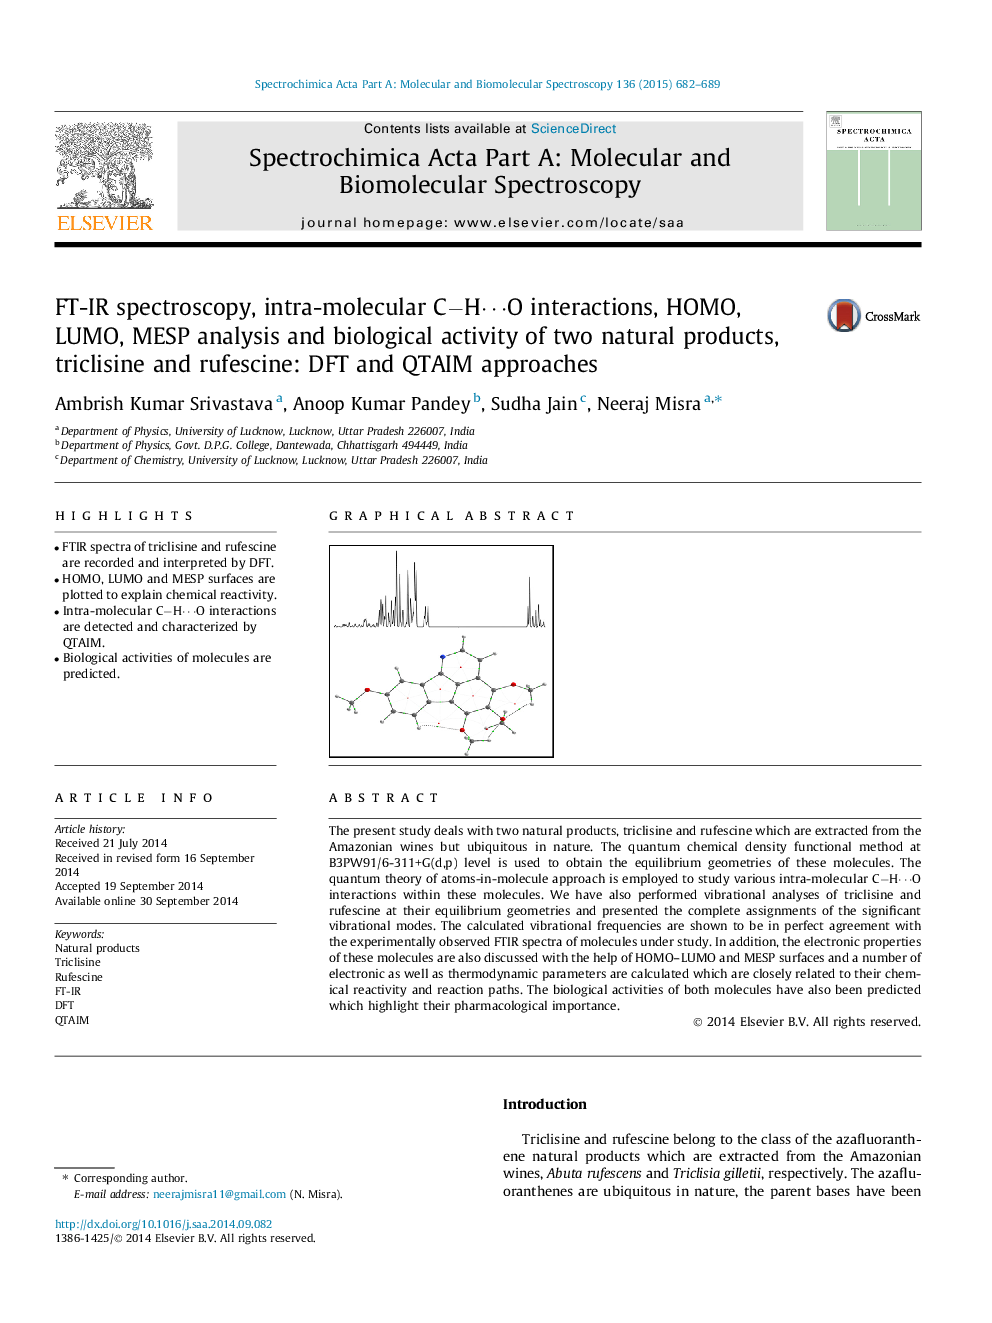 FT-IR spectroscopy, intra-molecular C−H⋯O interactions, HOMO, LUMO, MESP analysis and biological activity of two natural products, triclisine and rufescine: DFT and QTAIM approaches